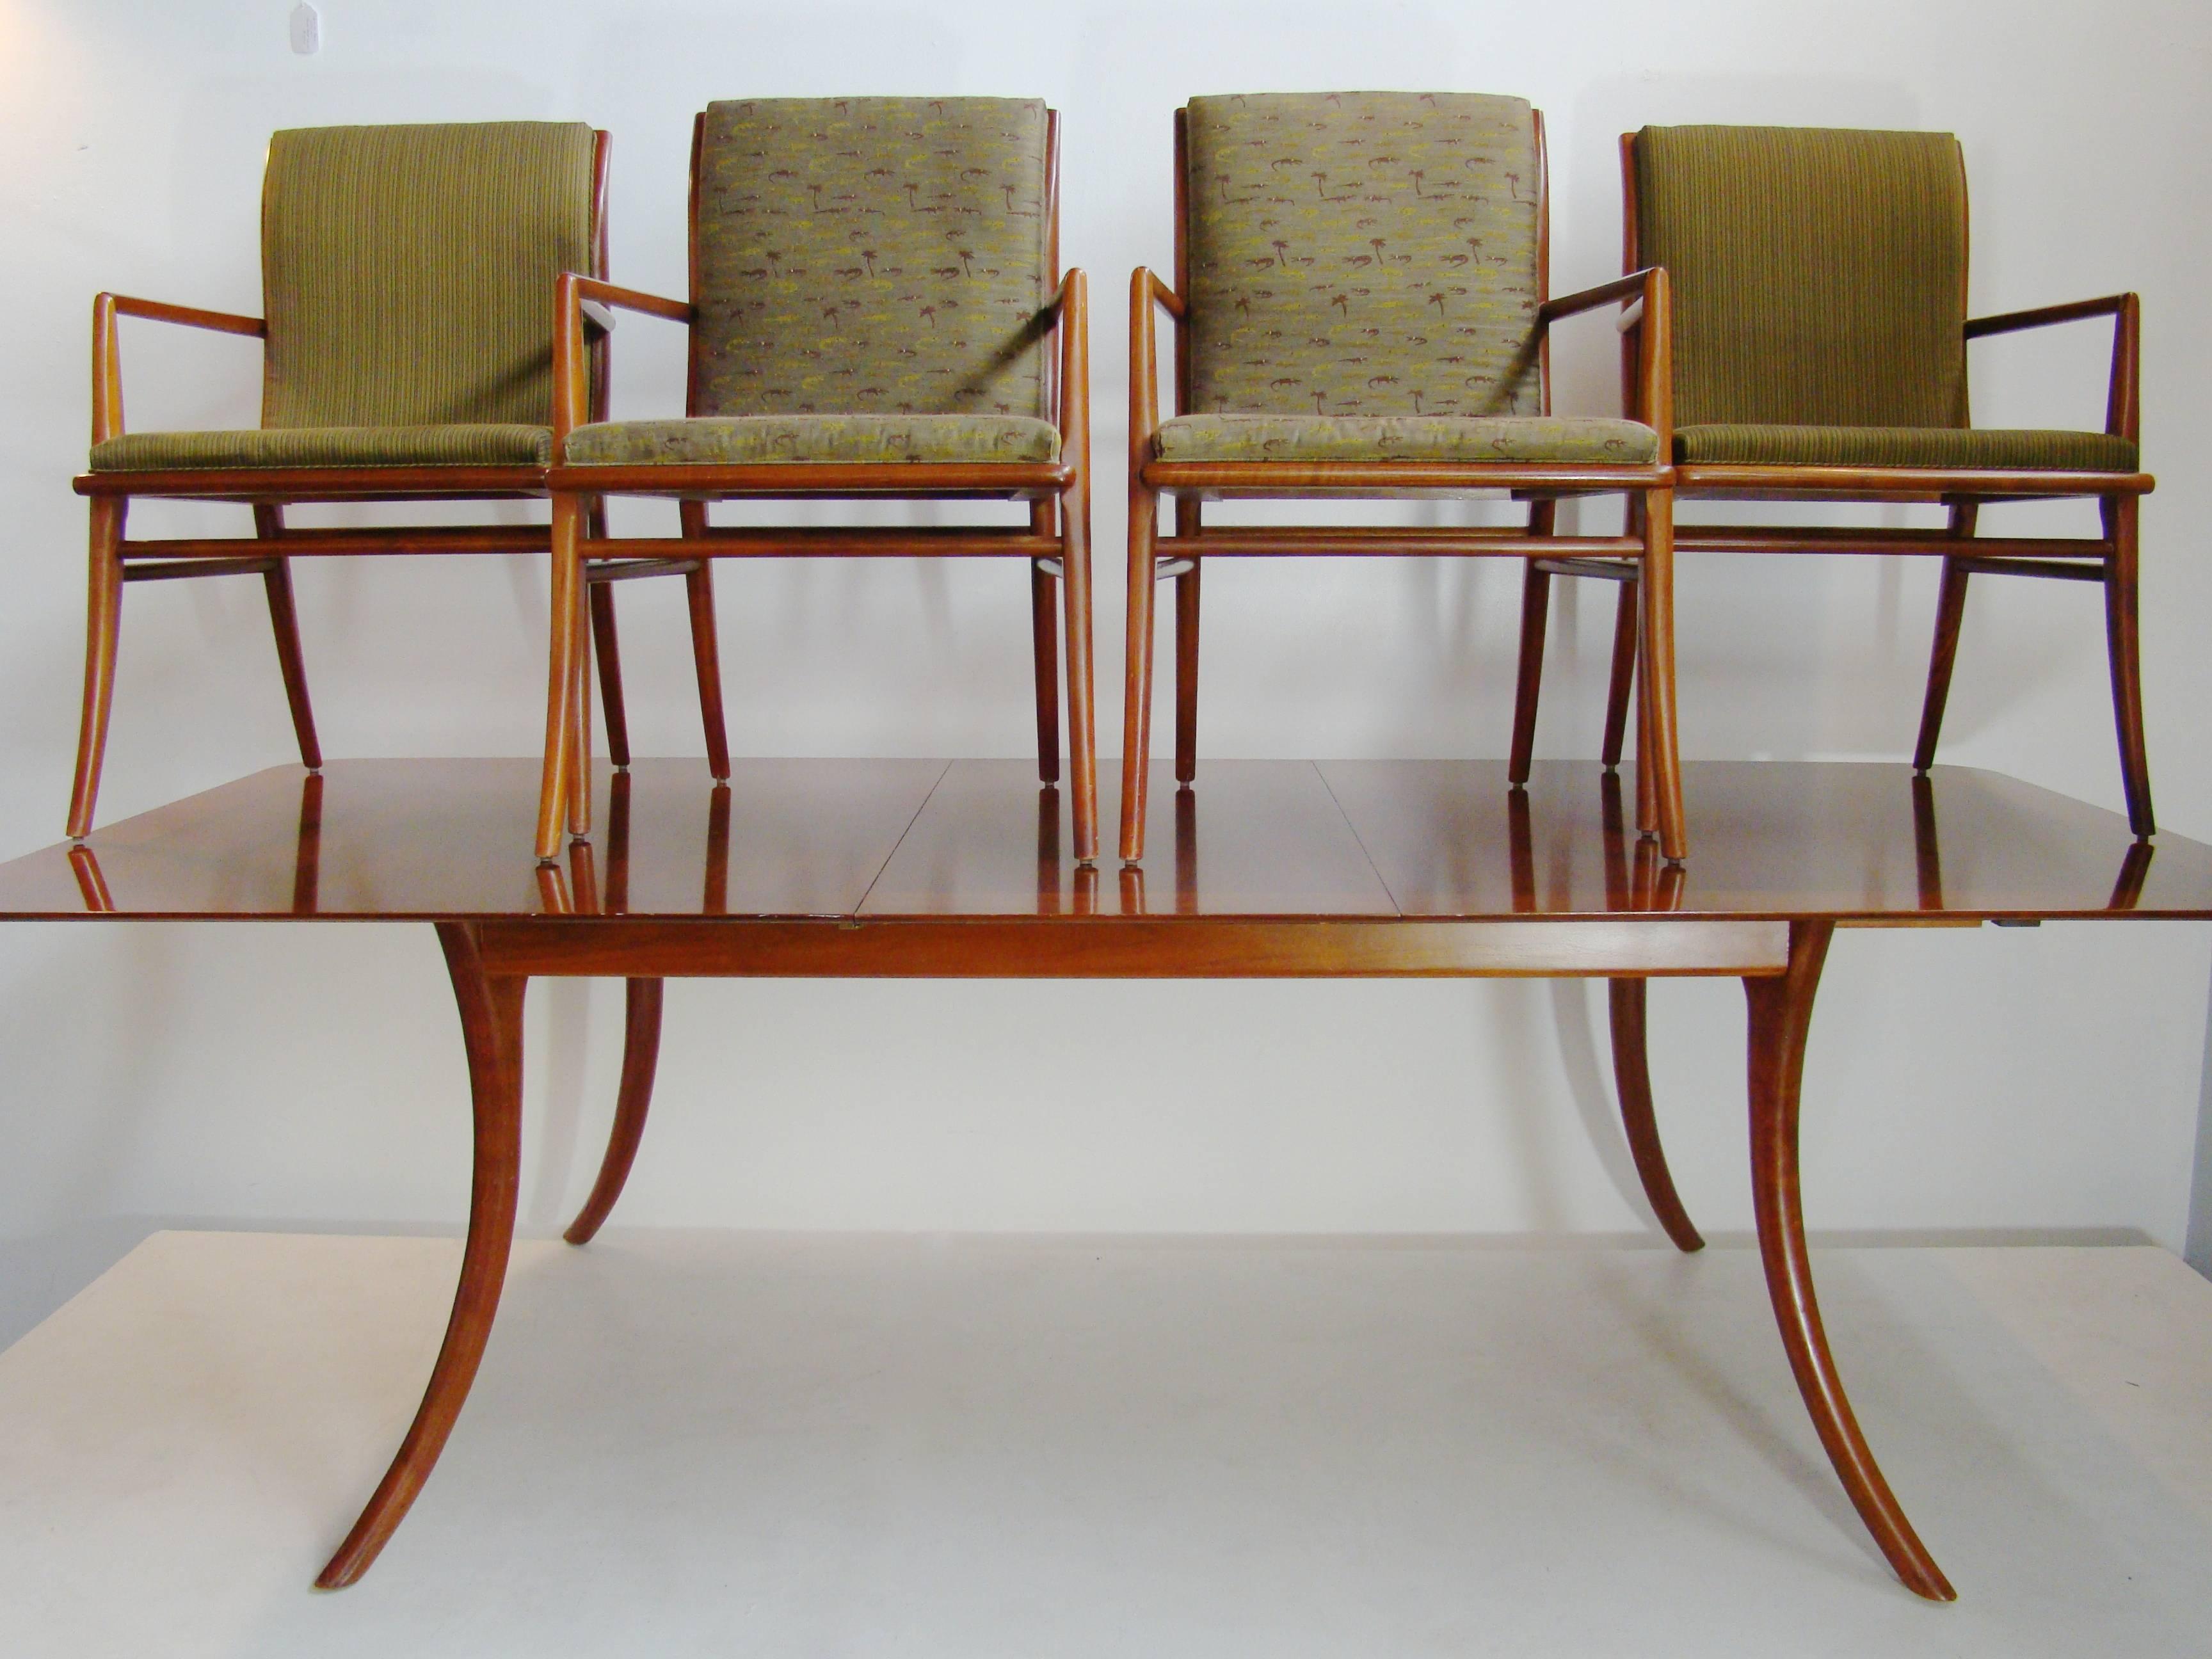 Incredible Gibbings dining room set with ten chairs and table, circa 1950. The set includes the dining table with two leaves, six side chairs, and four armchairs. The table is in a separate listing as are the four armchairs and six side chairs.